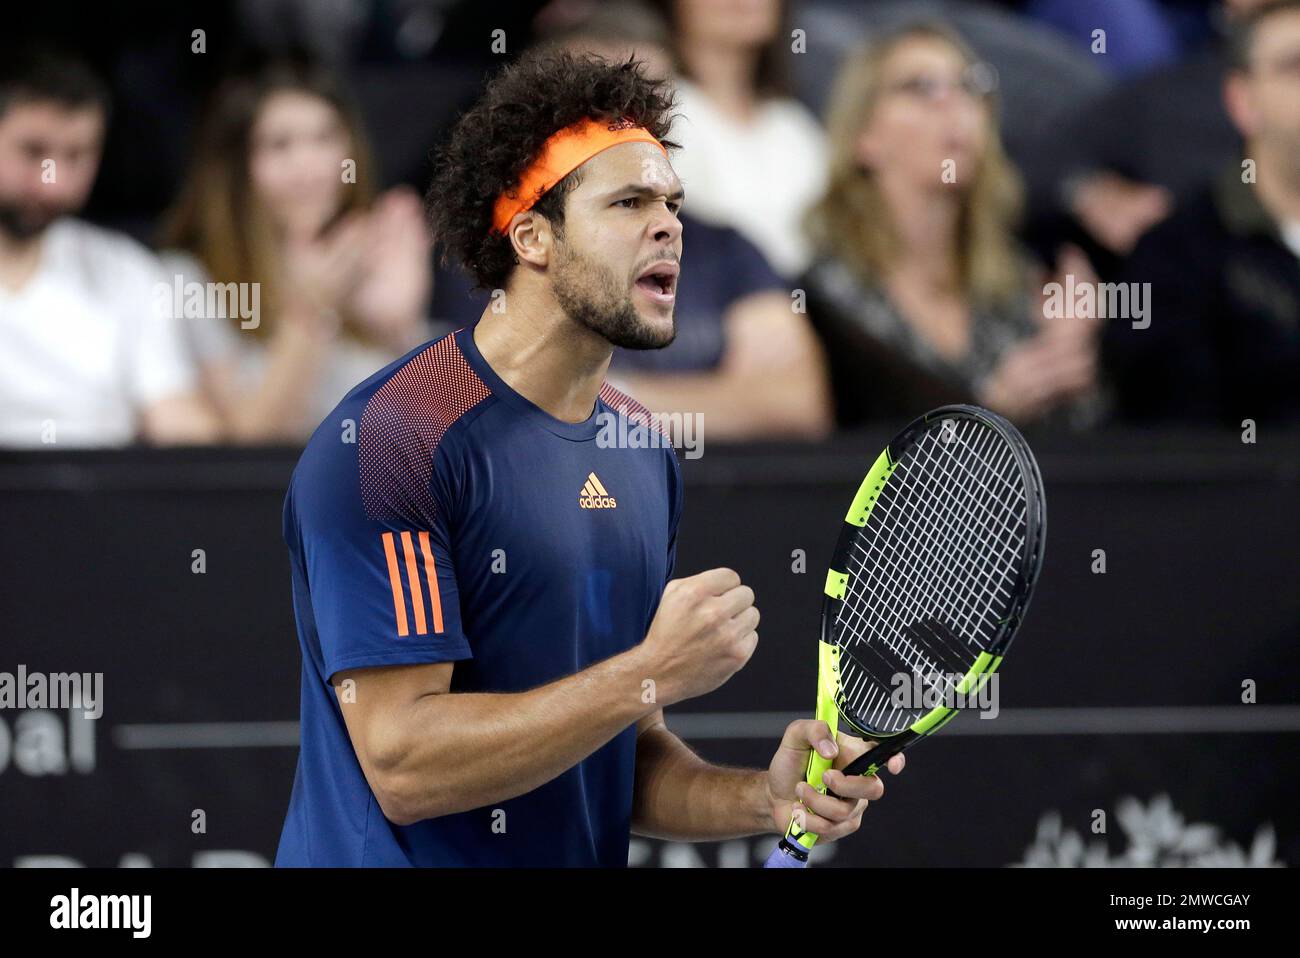 Jo-Wilfried Tsonga of France reacts after after winning a point against Lucas Pouille of France, during their final match at the Open 13 Provence tennis tournament, in Marseille, southern France, Sunday Feb.26,